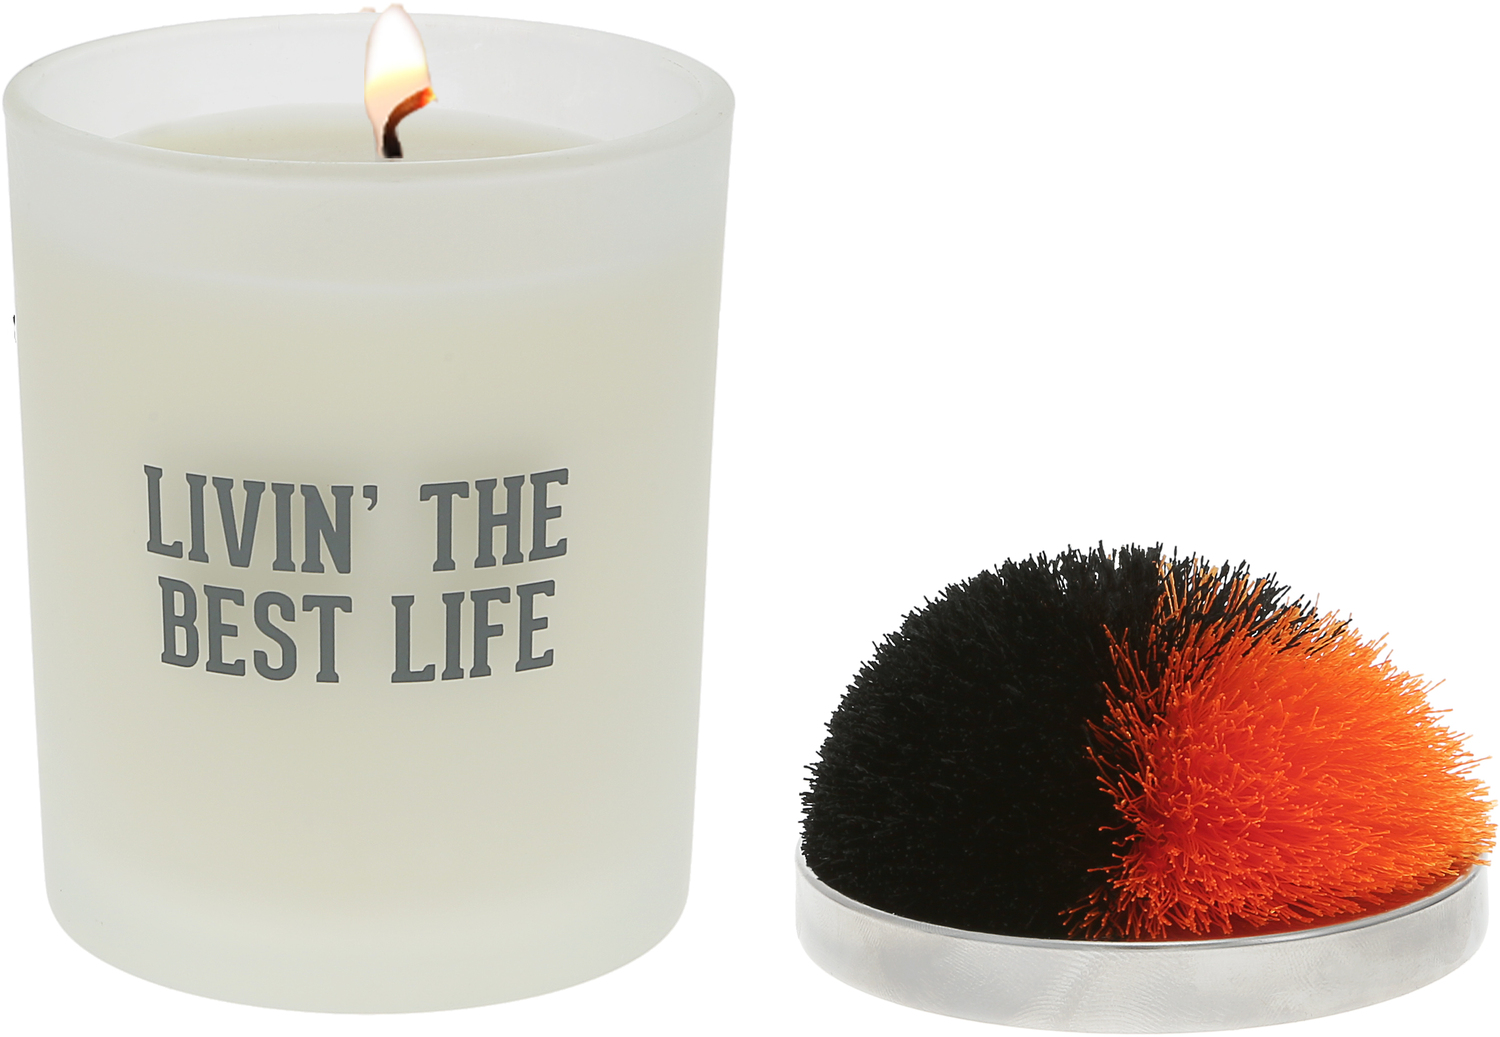 Best Life - Black & Orange by Repre-Scent - Best Life - Black & Orange - 5.5 oz - 100% Soy Wax Candle with Pom Pom Lid
Scent: Tranquility